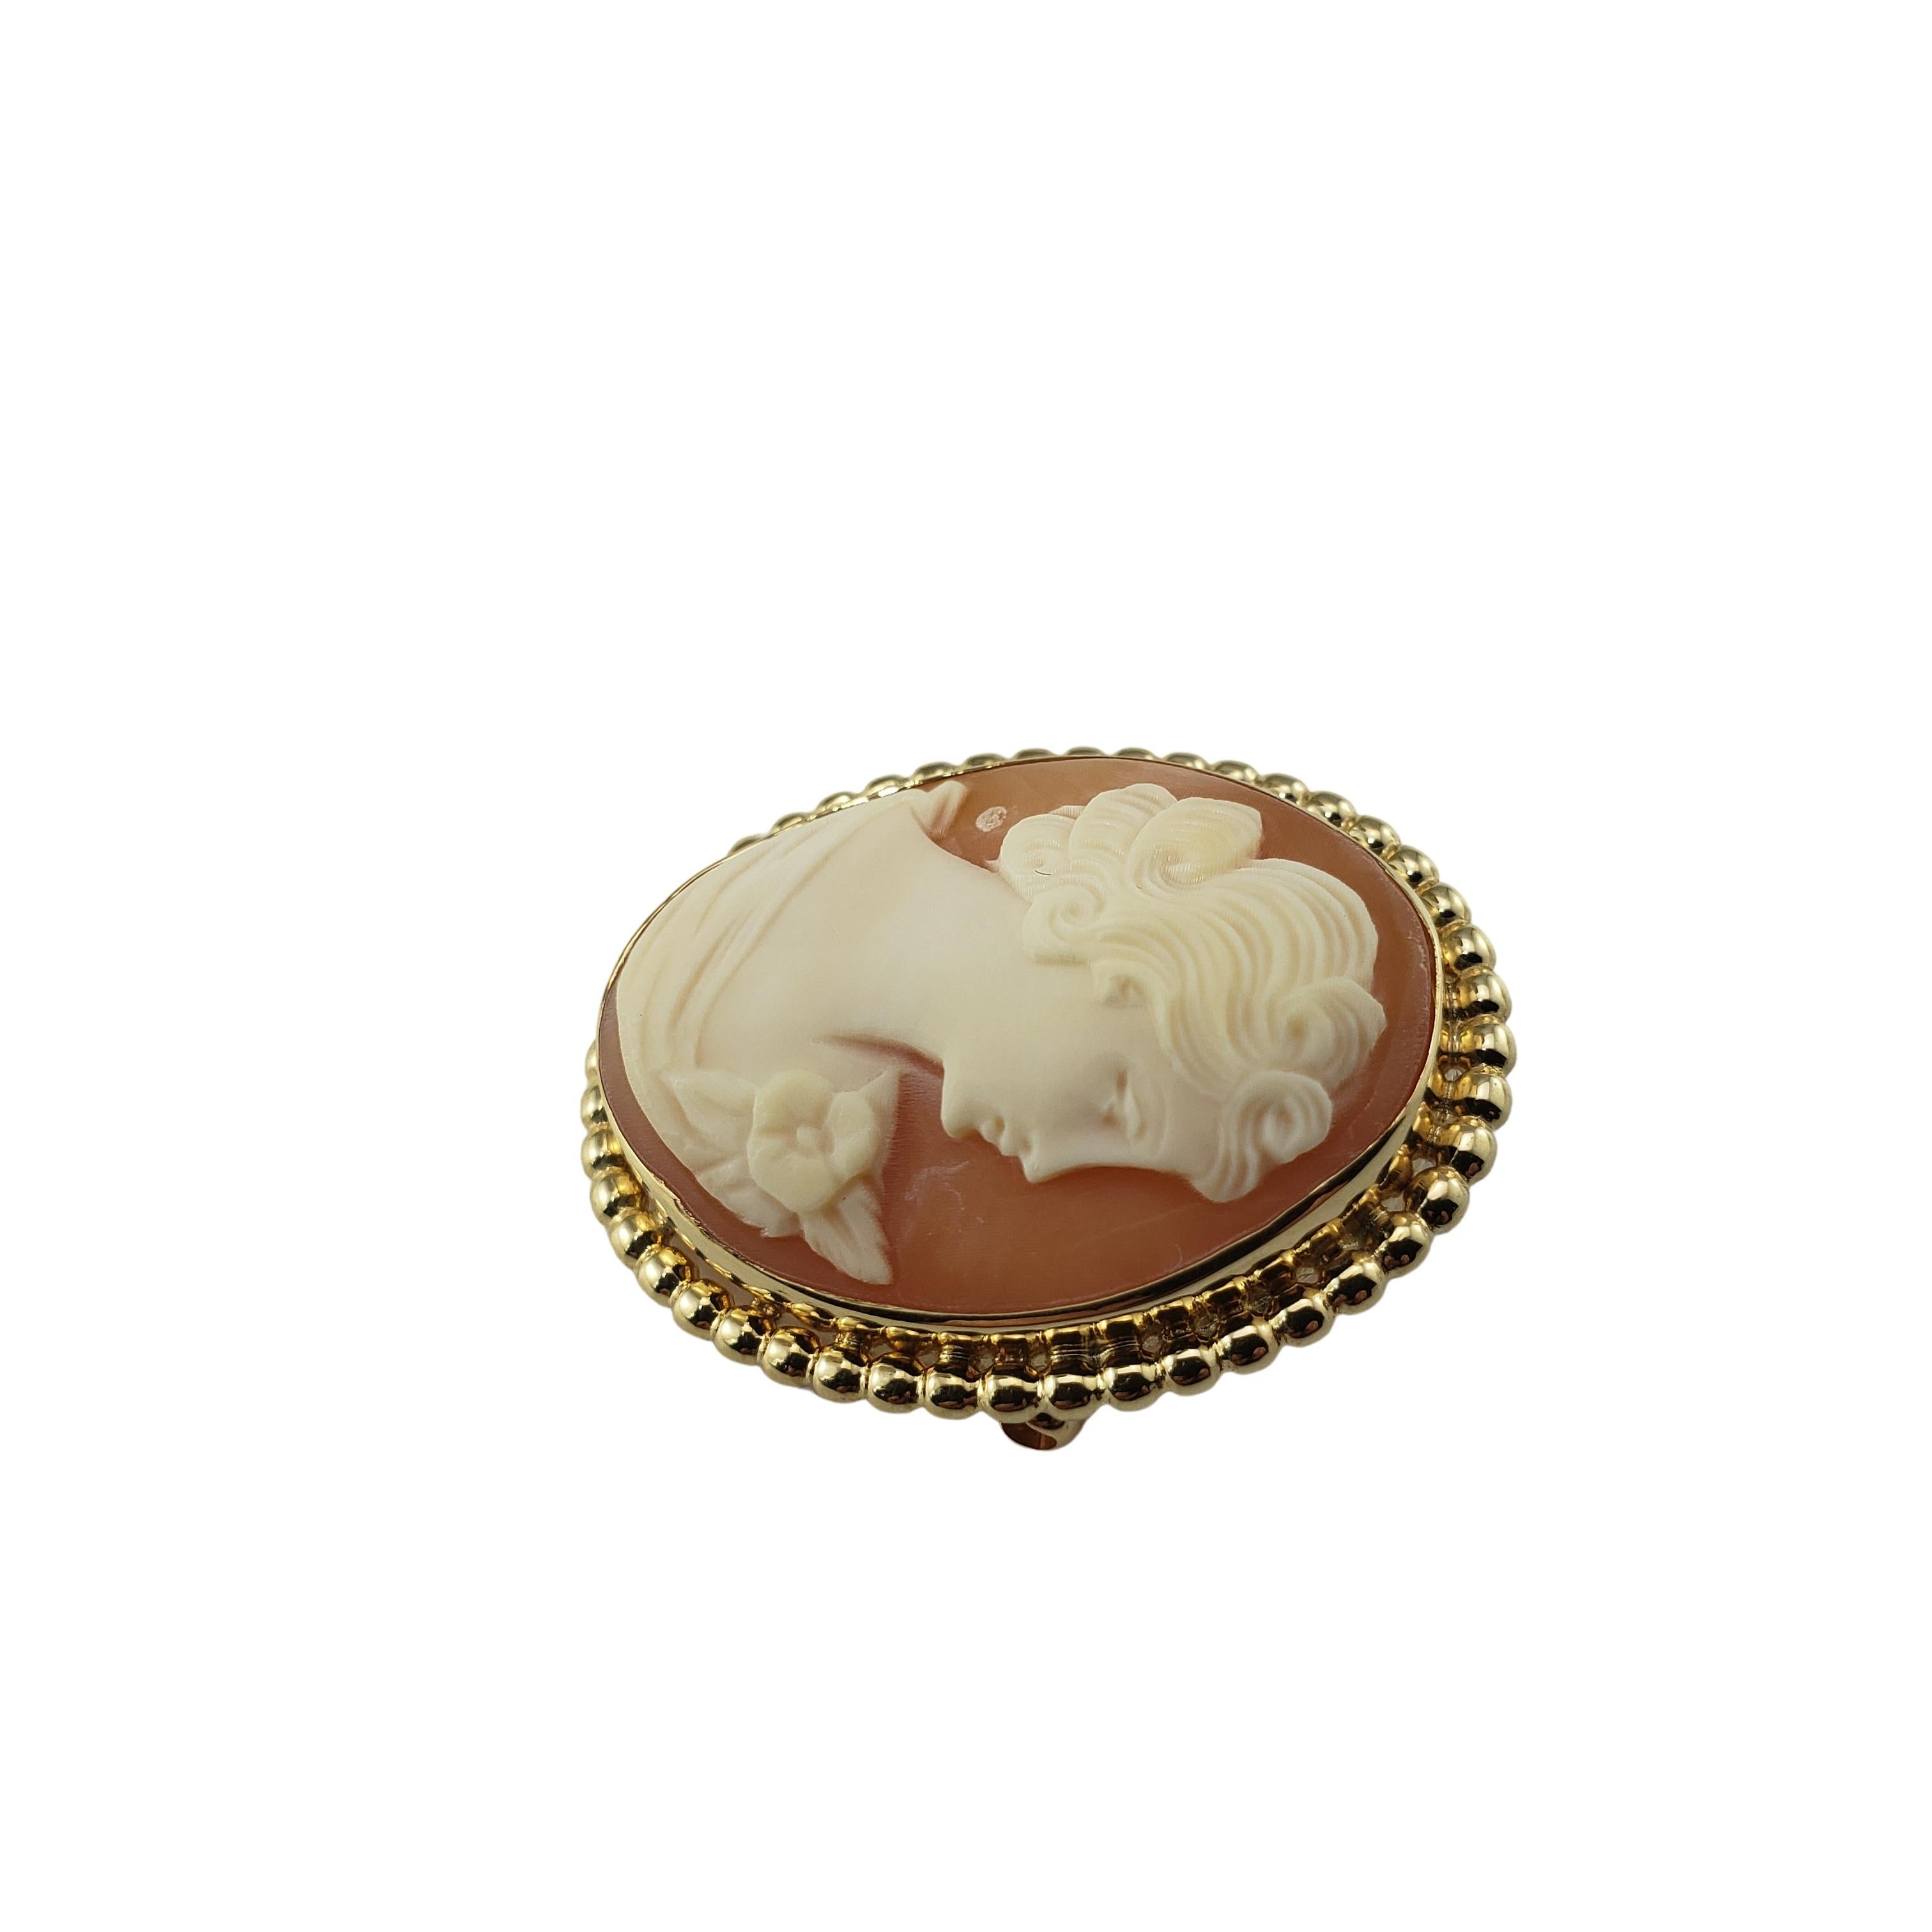 Vintage 10 Karat Yellow Gold Cameo Brooch/Pendant-

This elegant cameo features a lovely lady in profile set in beautifully detailed 10K yellow gold. Can be worn as a brooch or a pendant.

Size: 29 mm x 23 mm

Weight: 3.8 dwt. / 6.0 gr.

Stamped: